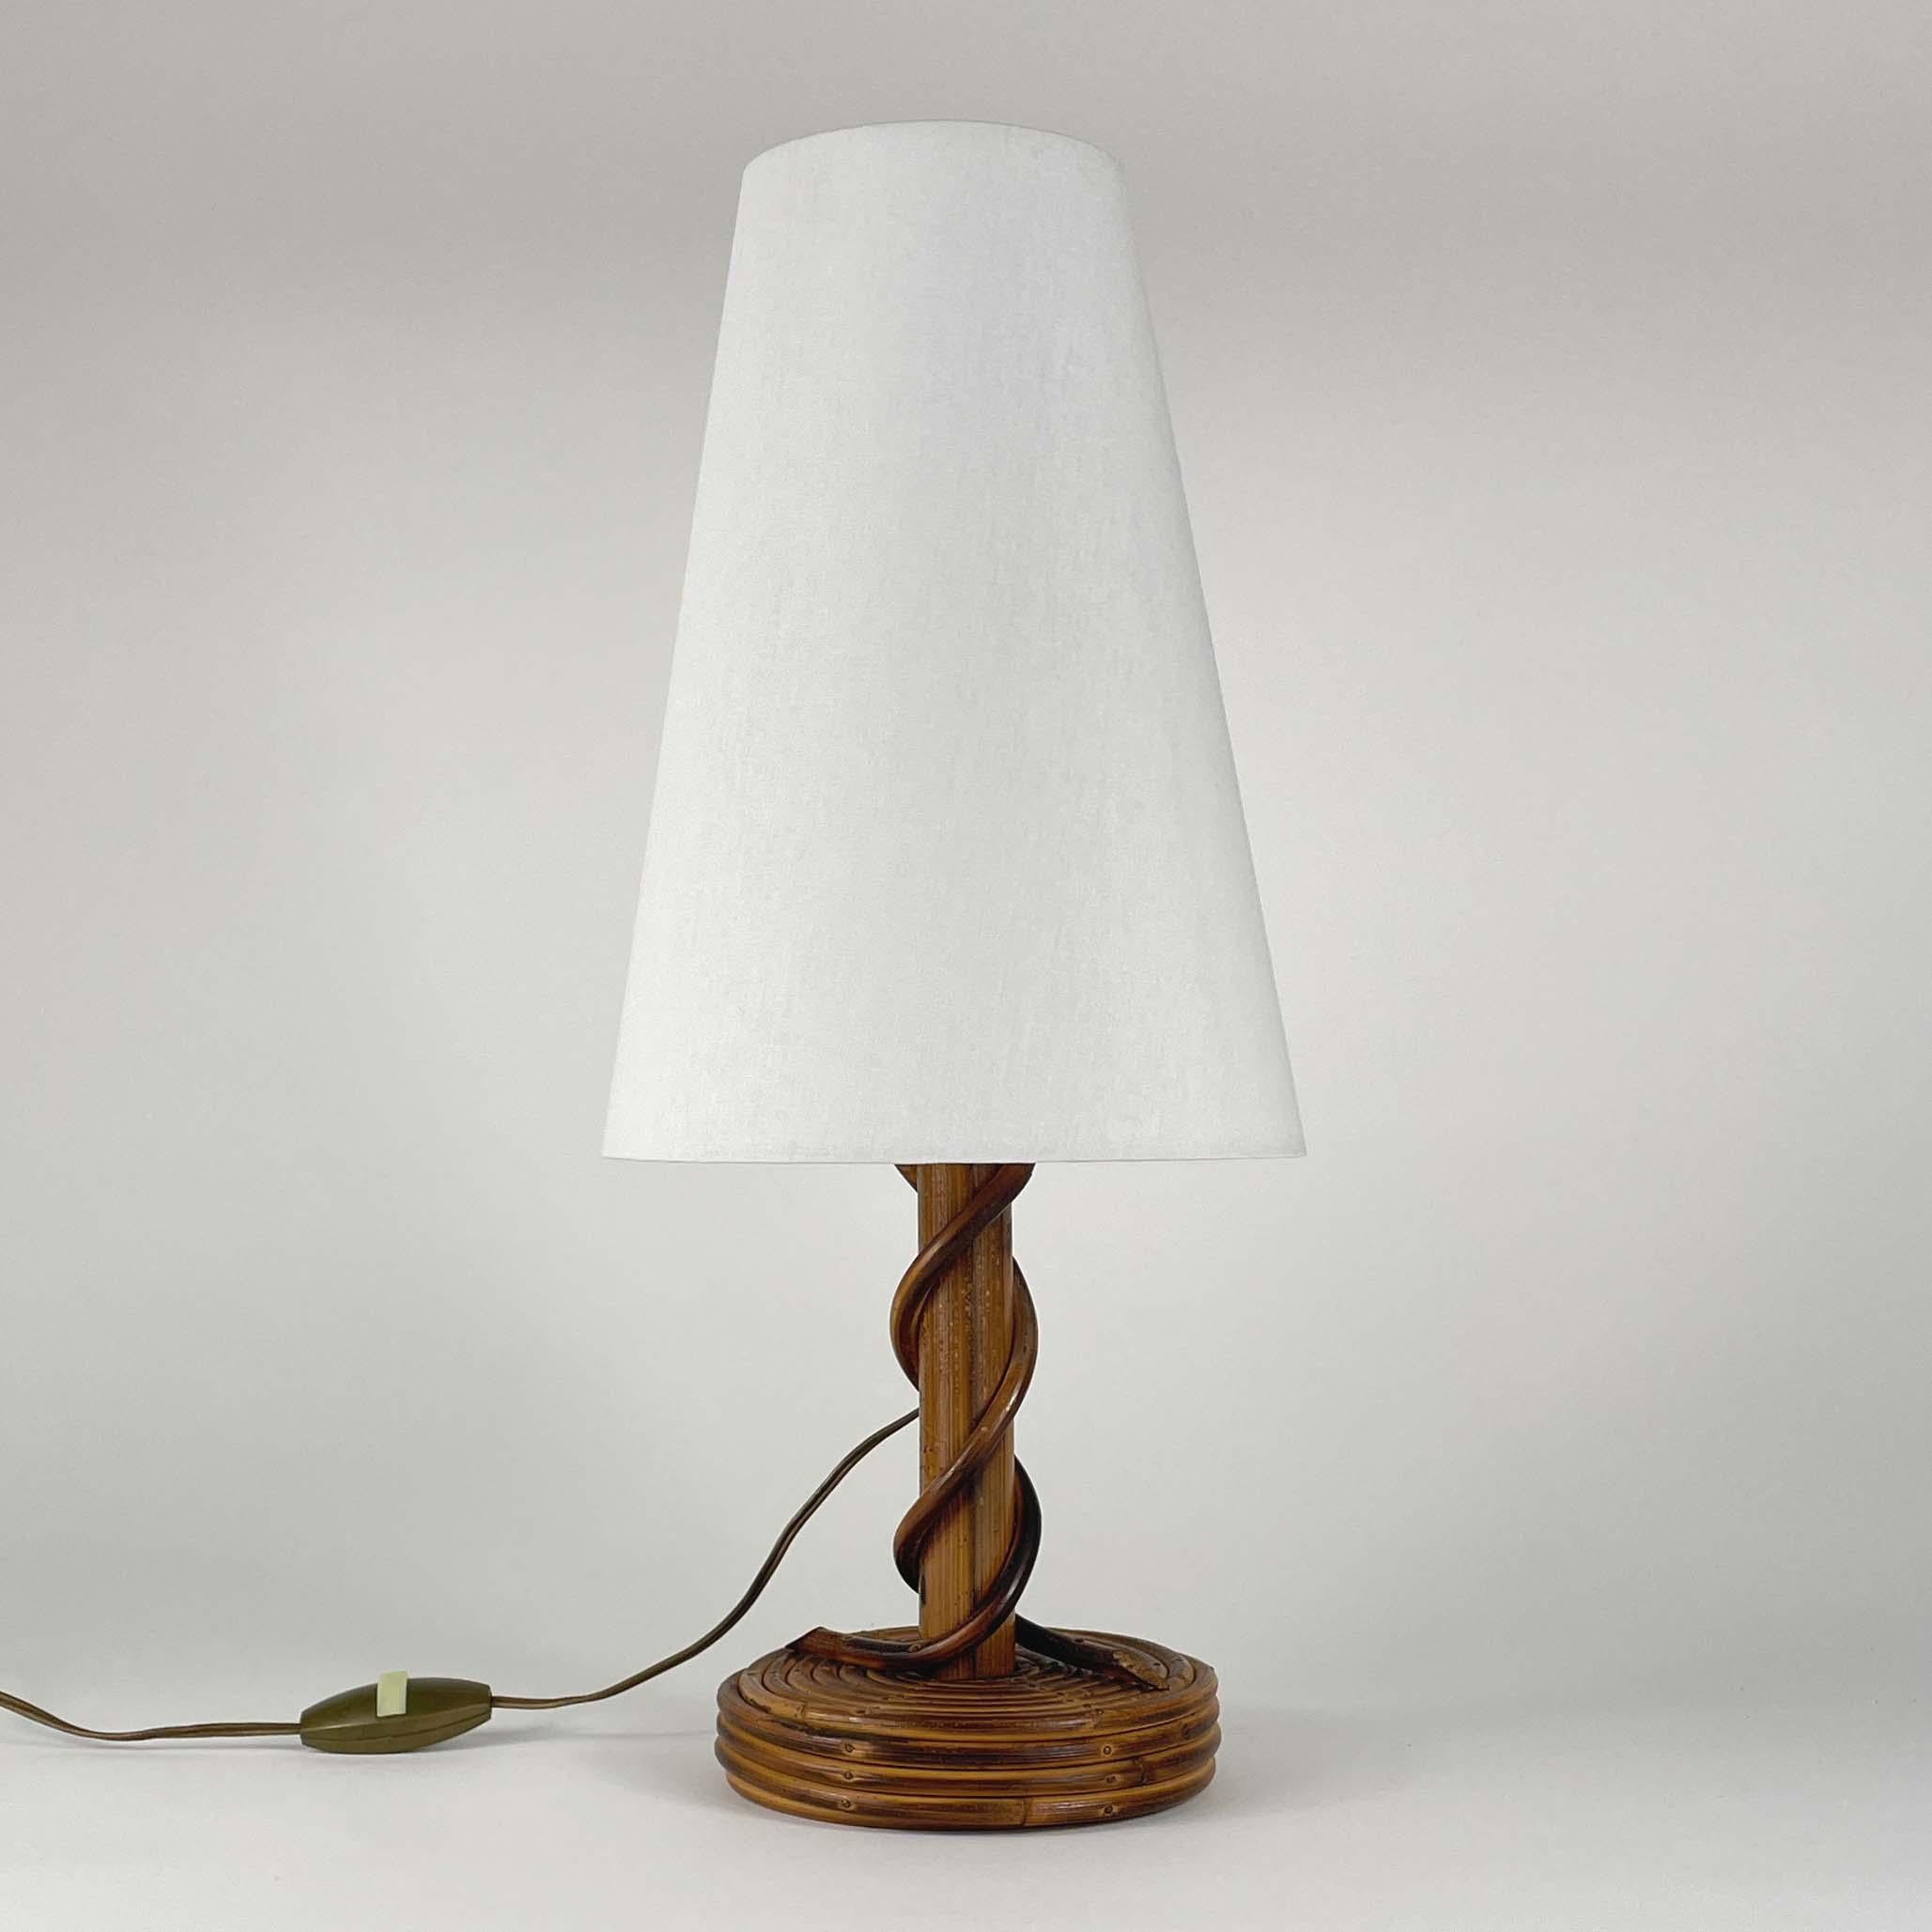 This beautiful table lamp was designed and manufactured by Louis Sognot in France in the 1950s. It features a bamboo and rattan base with off-white clip on conical shaped lampshade. The lampshade has been refurbished.

The light requires one E27